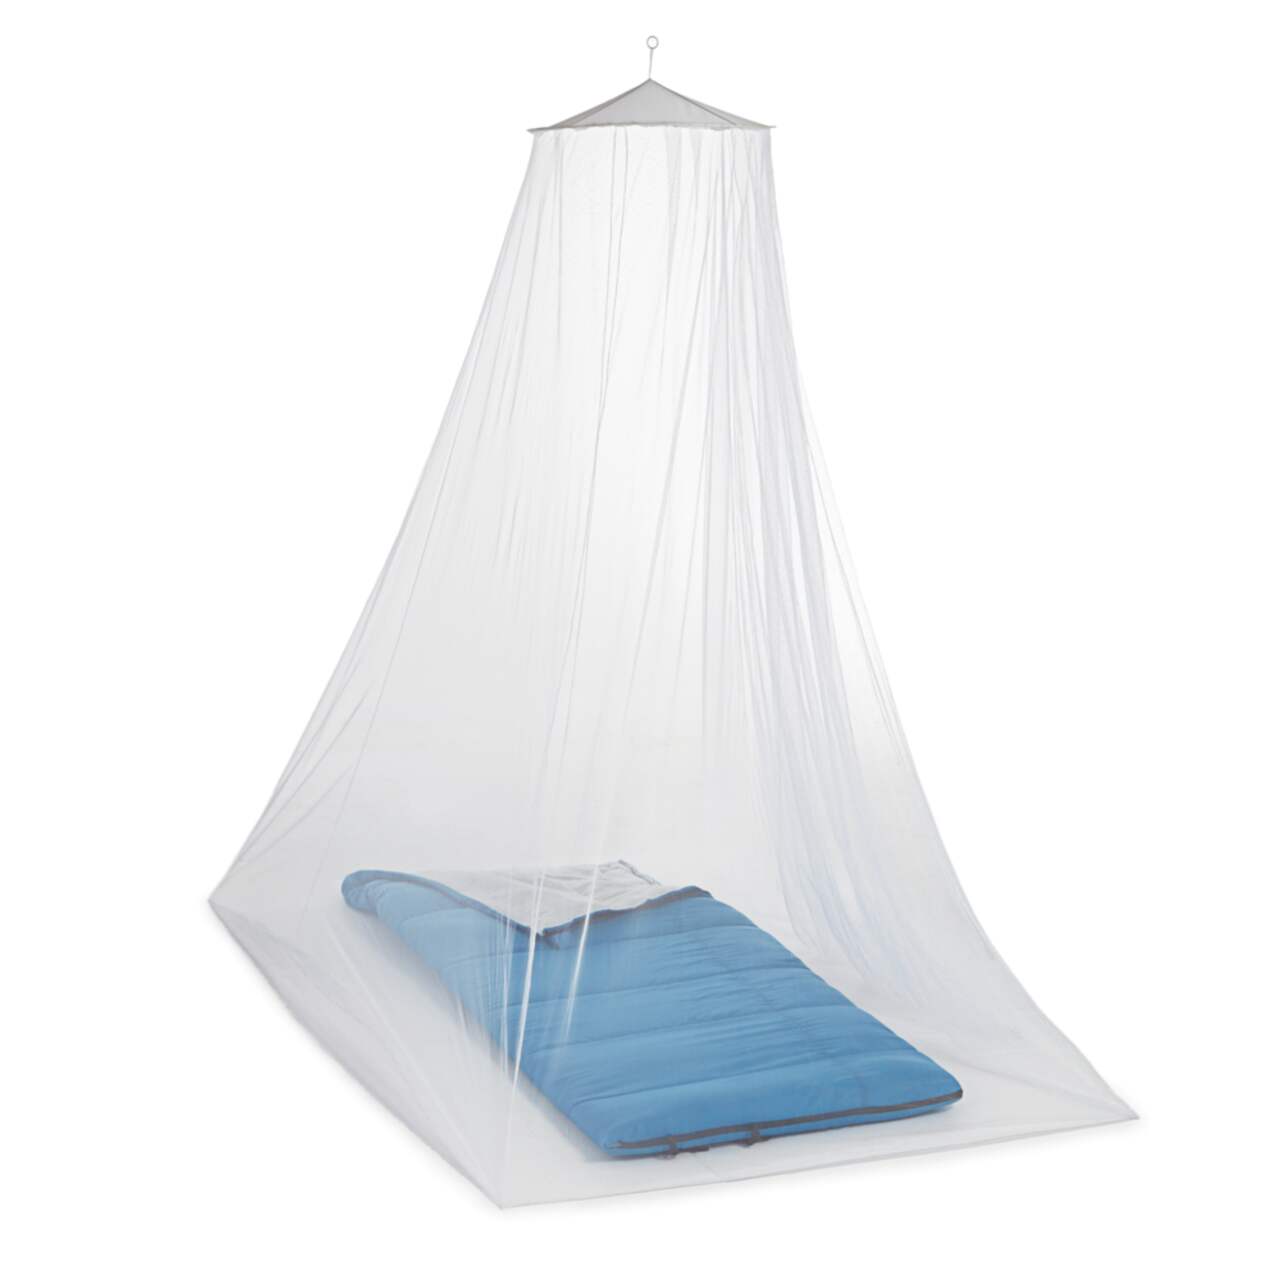 Woods 2-Person Pop-Up Hanging Mesh Mosquito Net For Camping, Fits